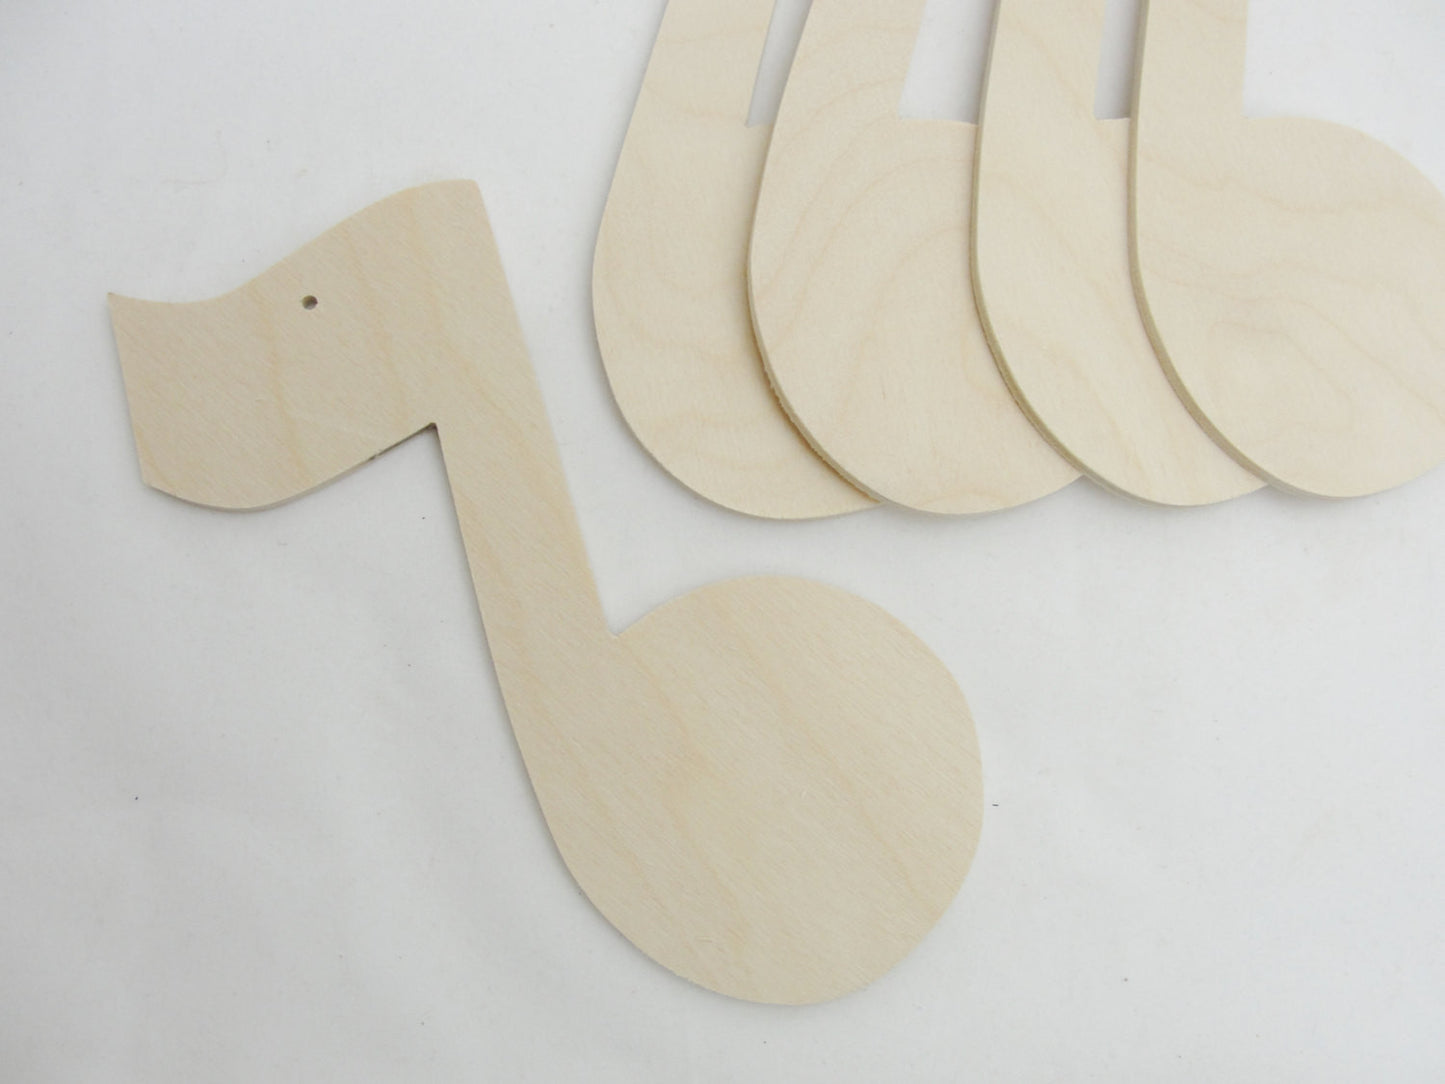 Large music note ornament set of 5 - Wood parts - Craft Supply House